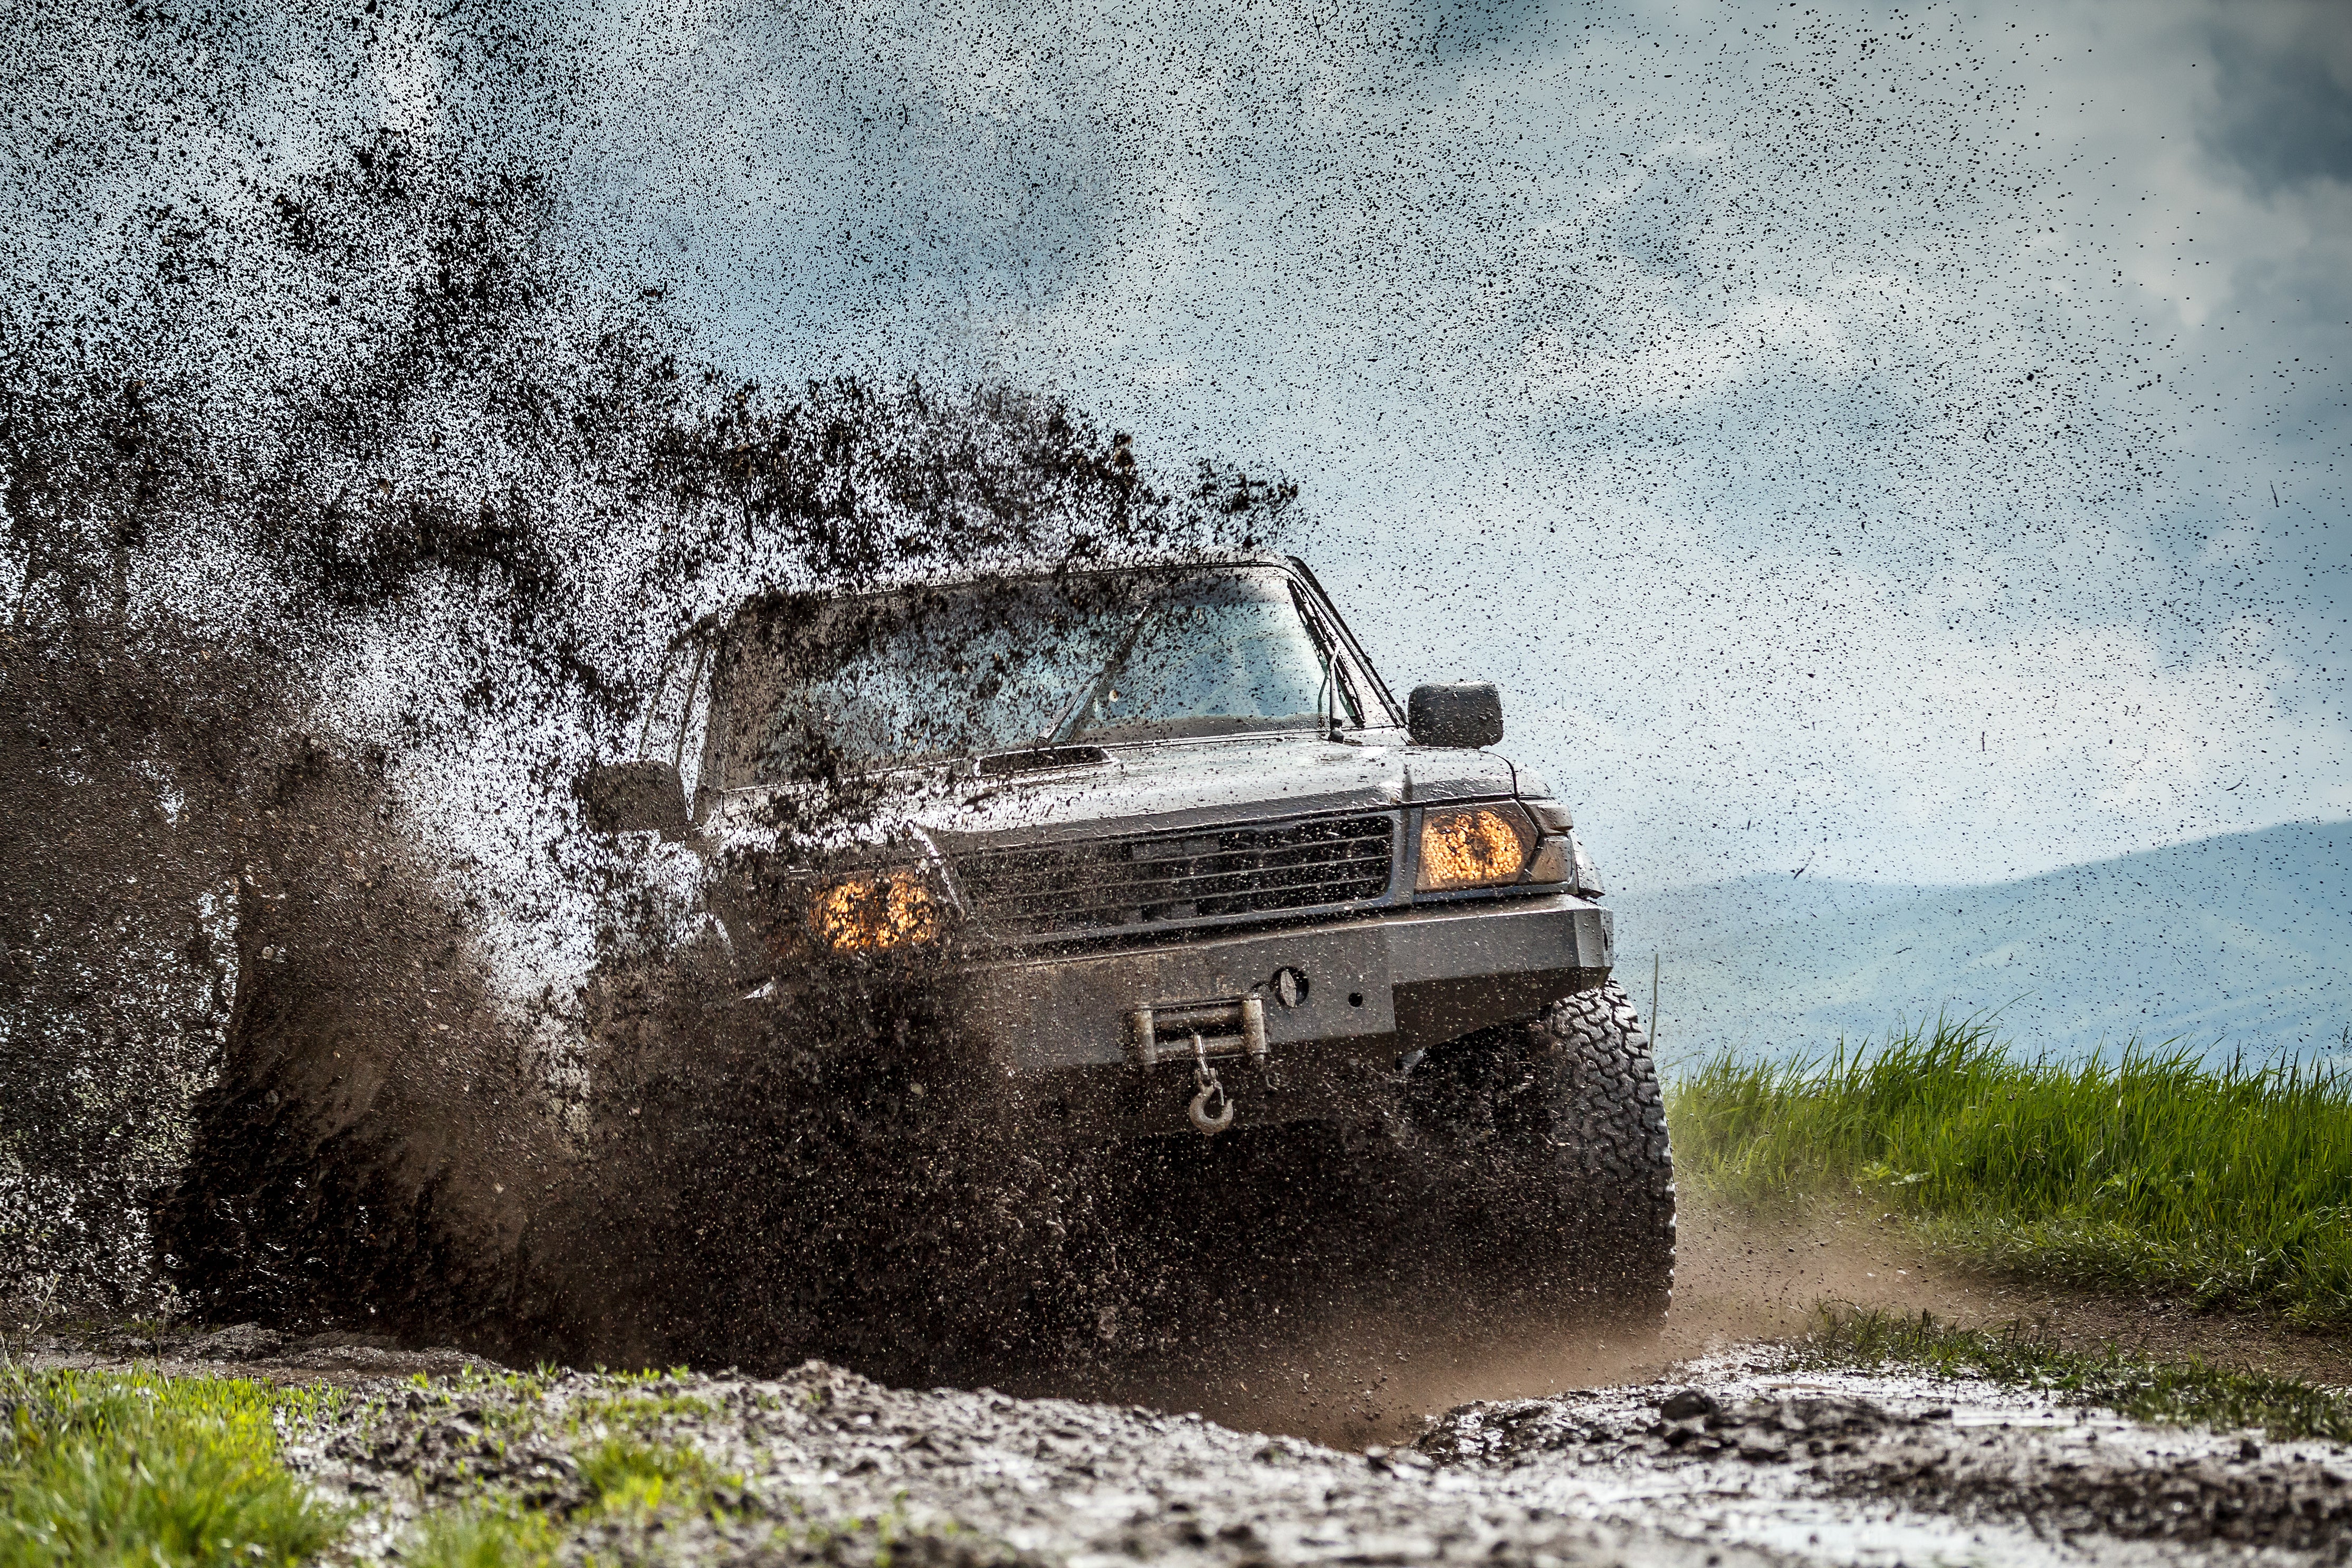 Essential Off-Roading Lighting Gear for Every Season